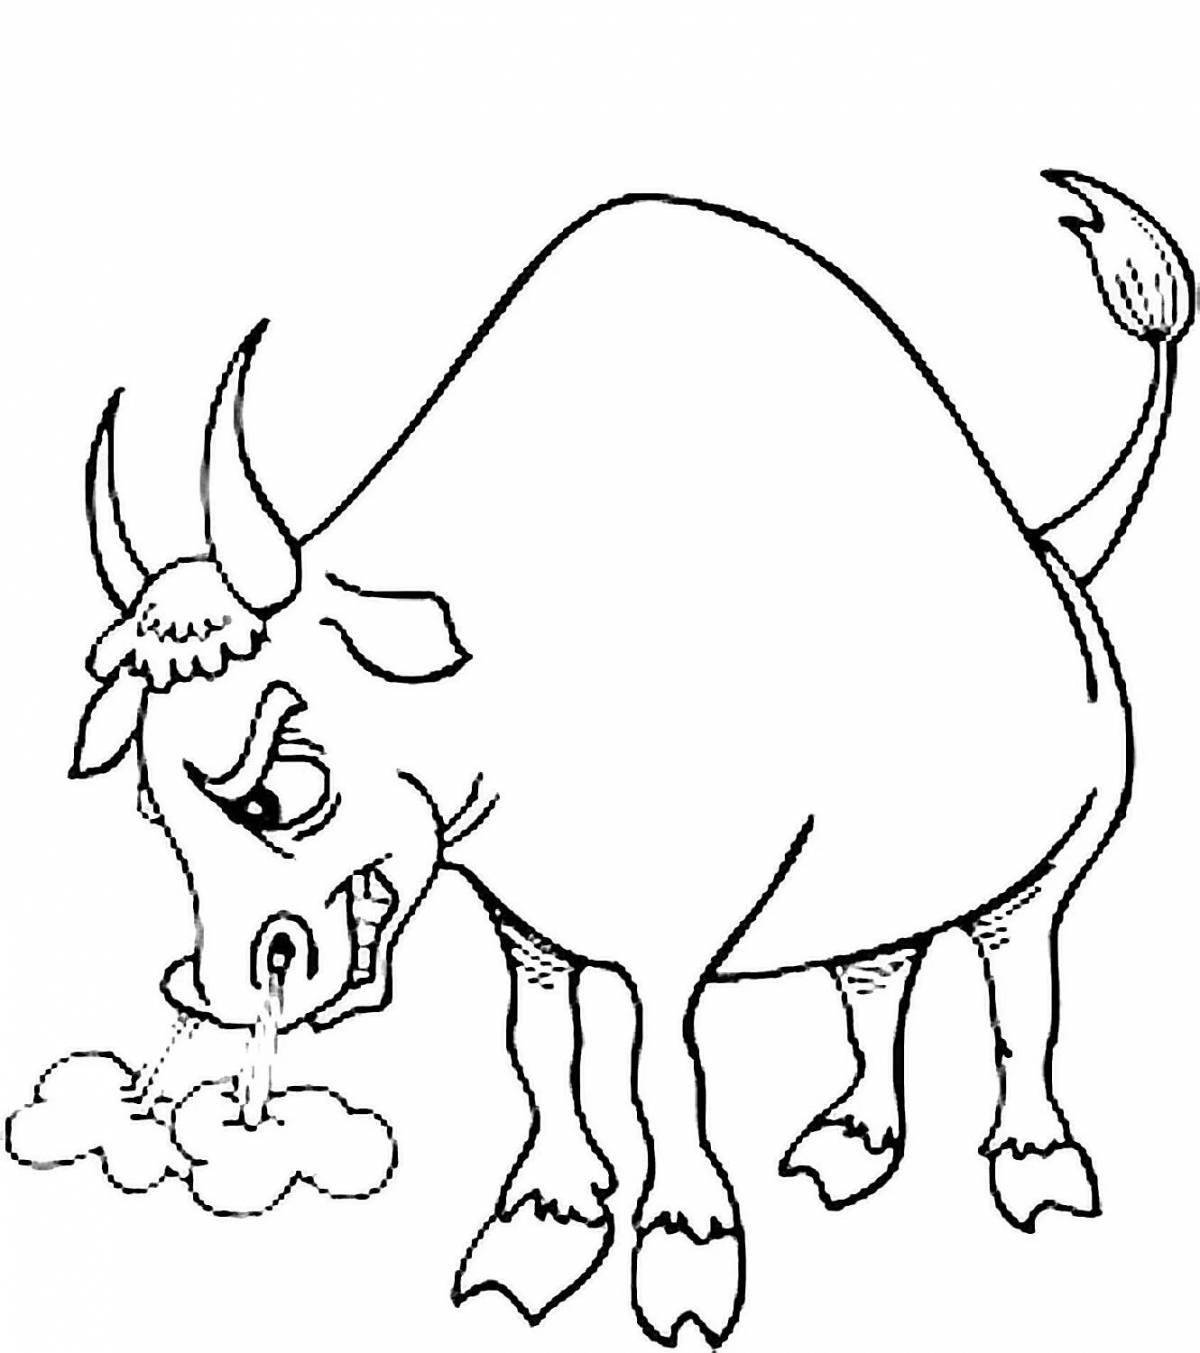 Awesome bull coloring for kids